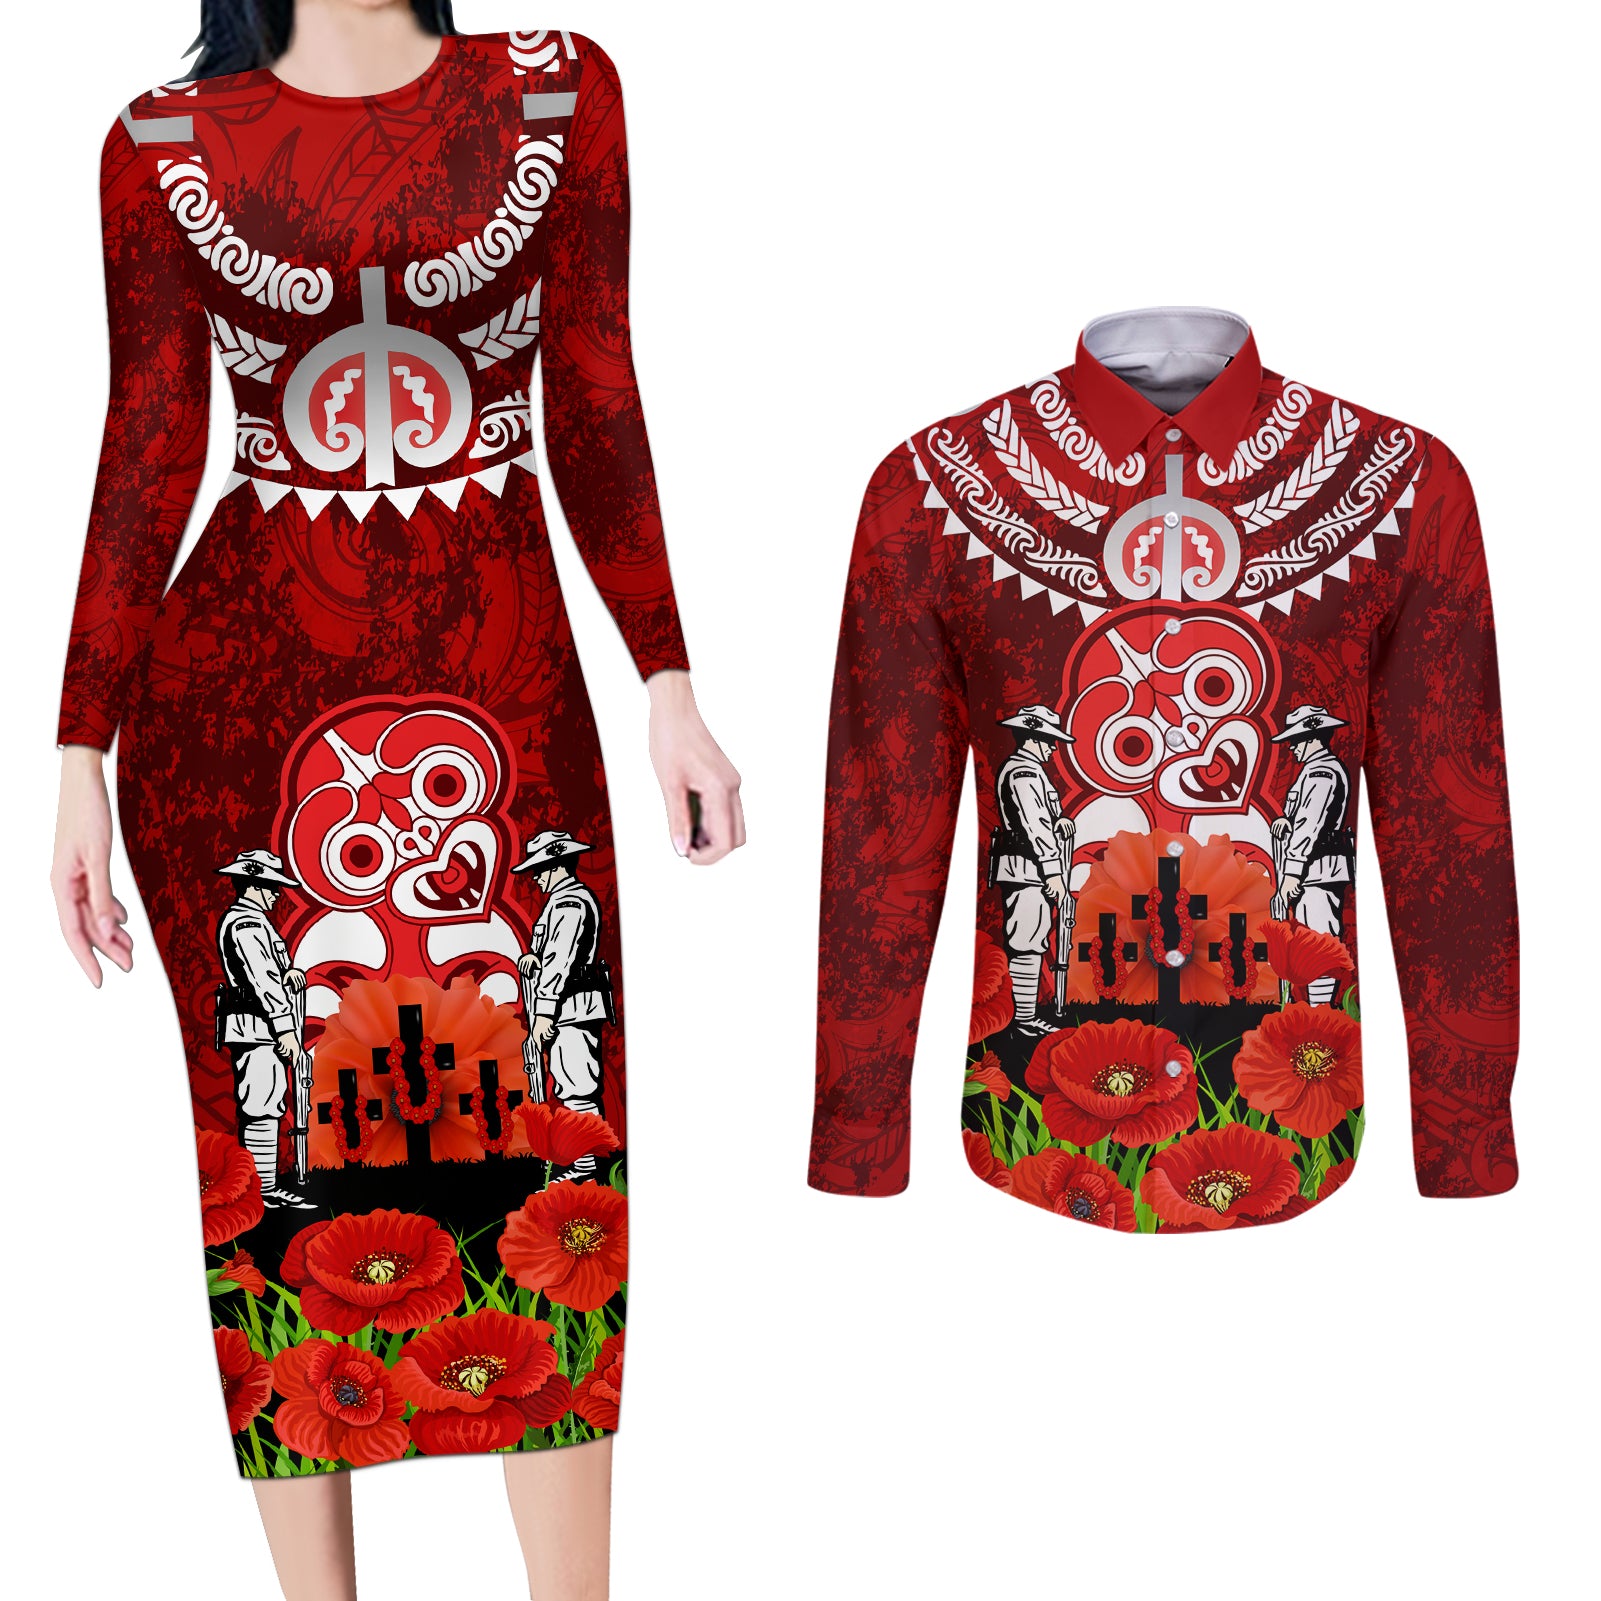 New Zealand ANZAC Waitangi Day Couples Matching Long Sleeve Bodycon Dress and Long Sleeve Button Shirt Hei Tiki and Soldier LT03 Red - Polynesian Pride